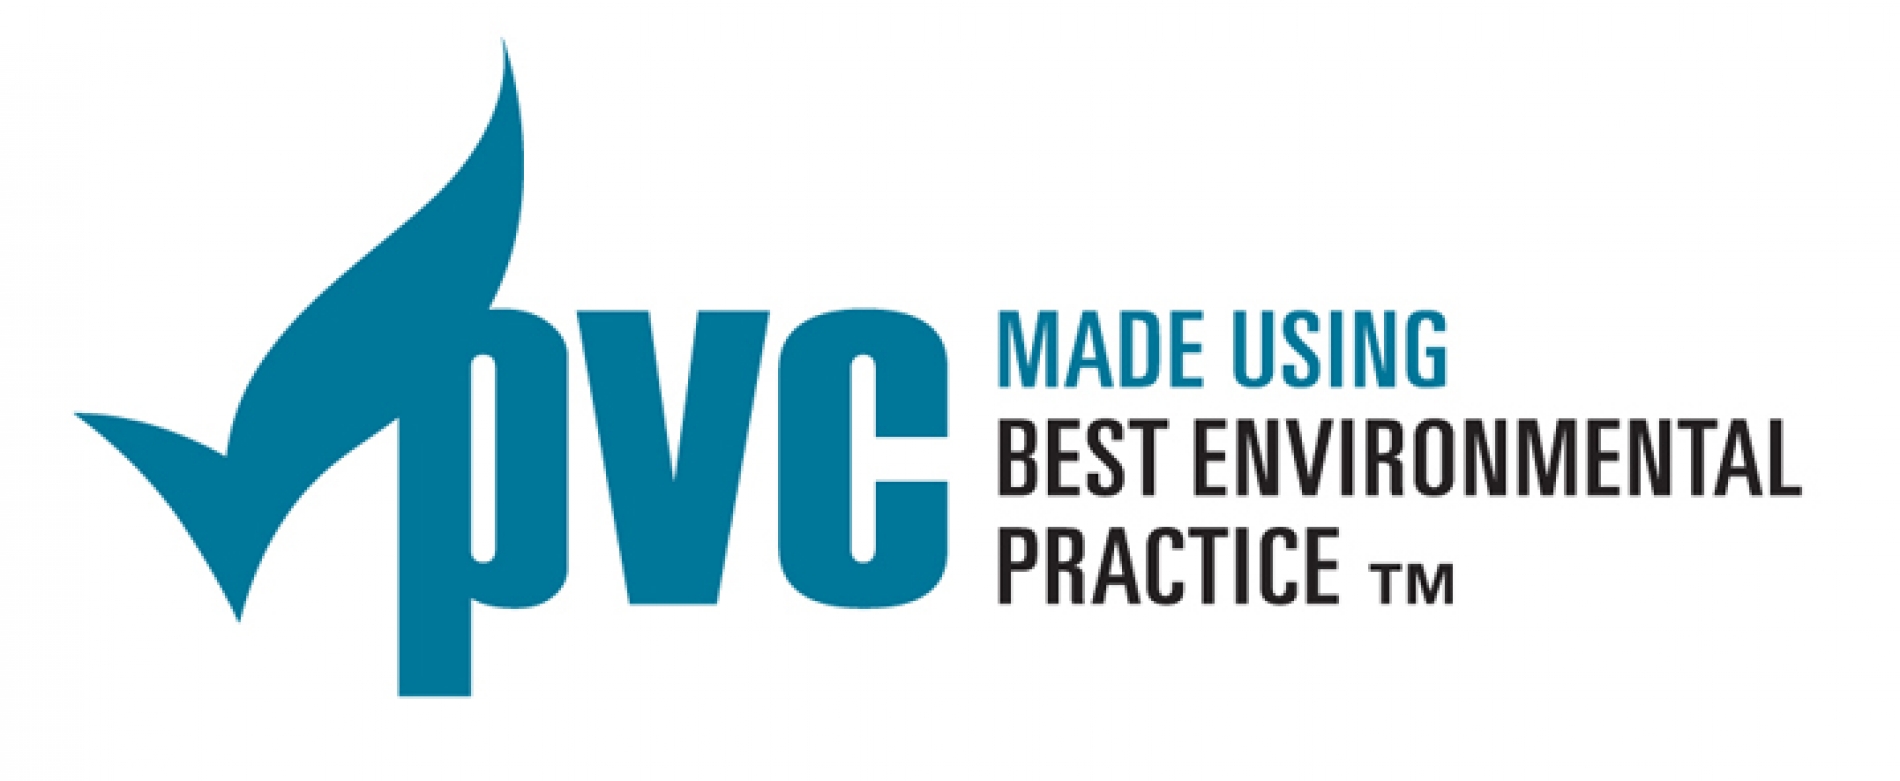 Vinyl Council issues last call for feedback on Best Environmental Practice PVC scheme